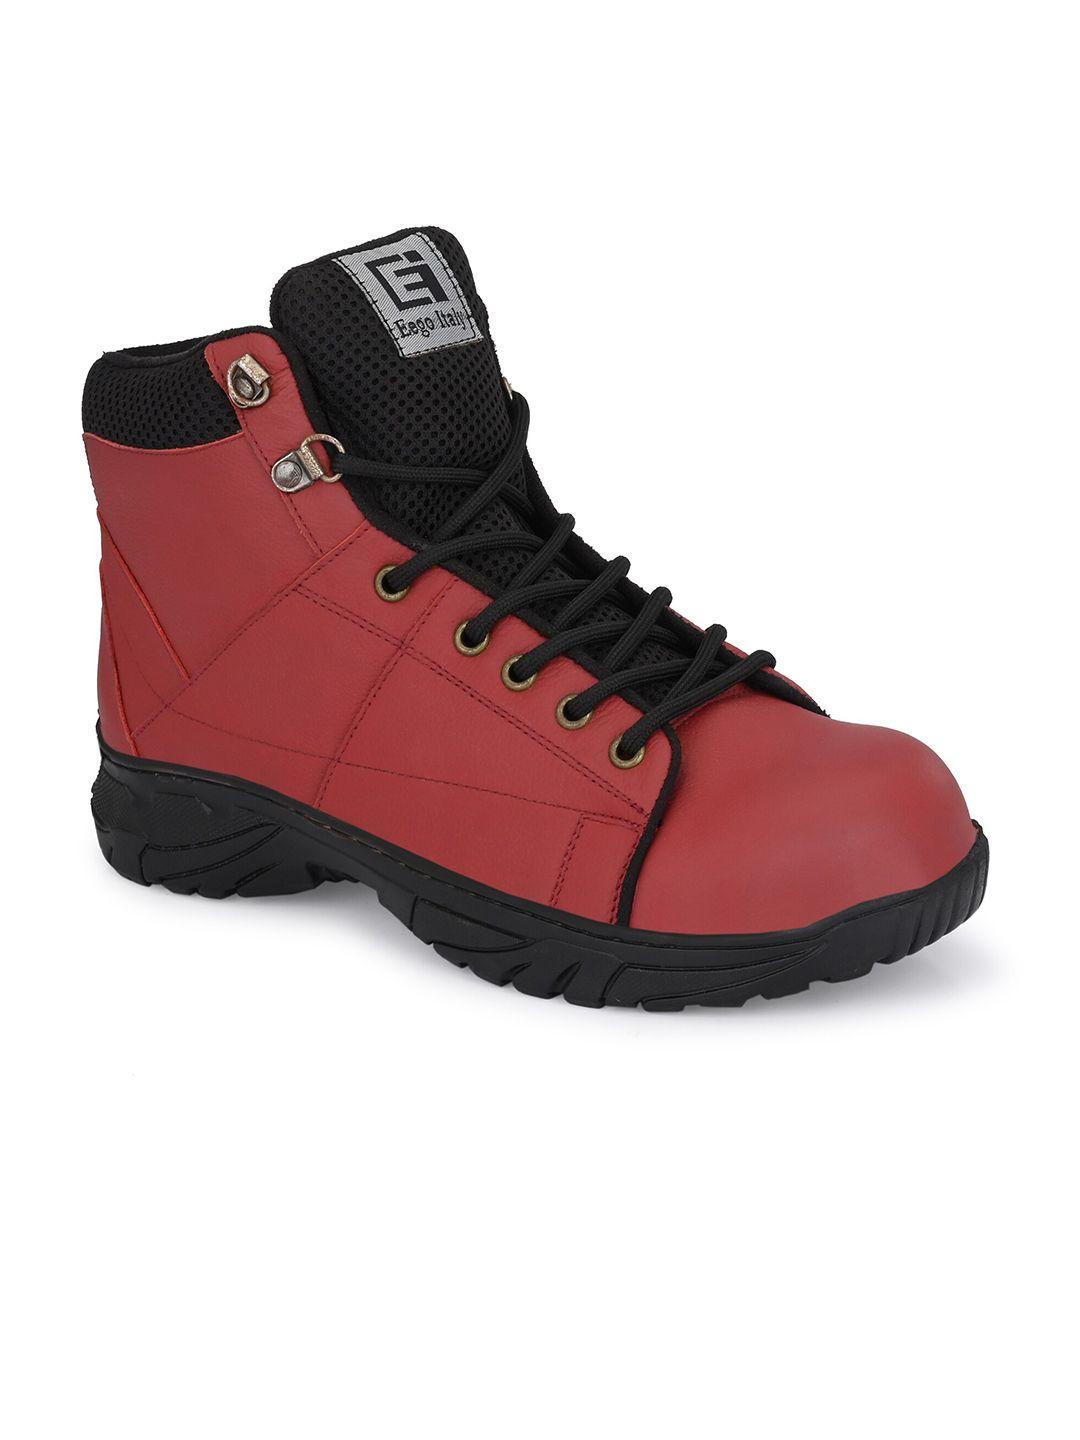 eego italy men red leather trekking shoes